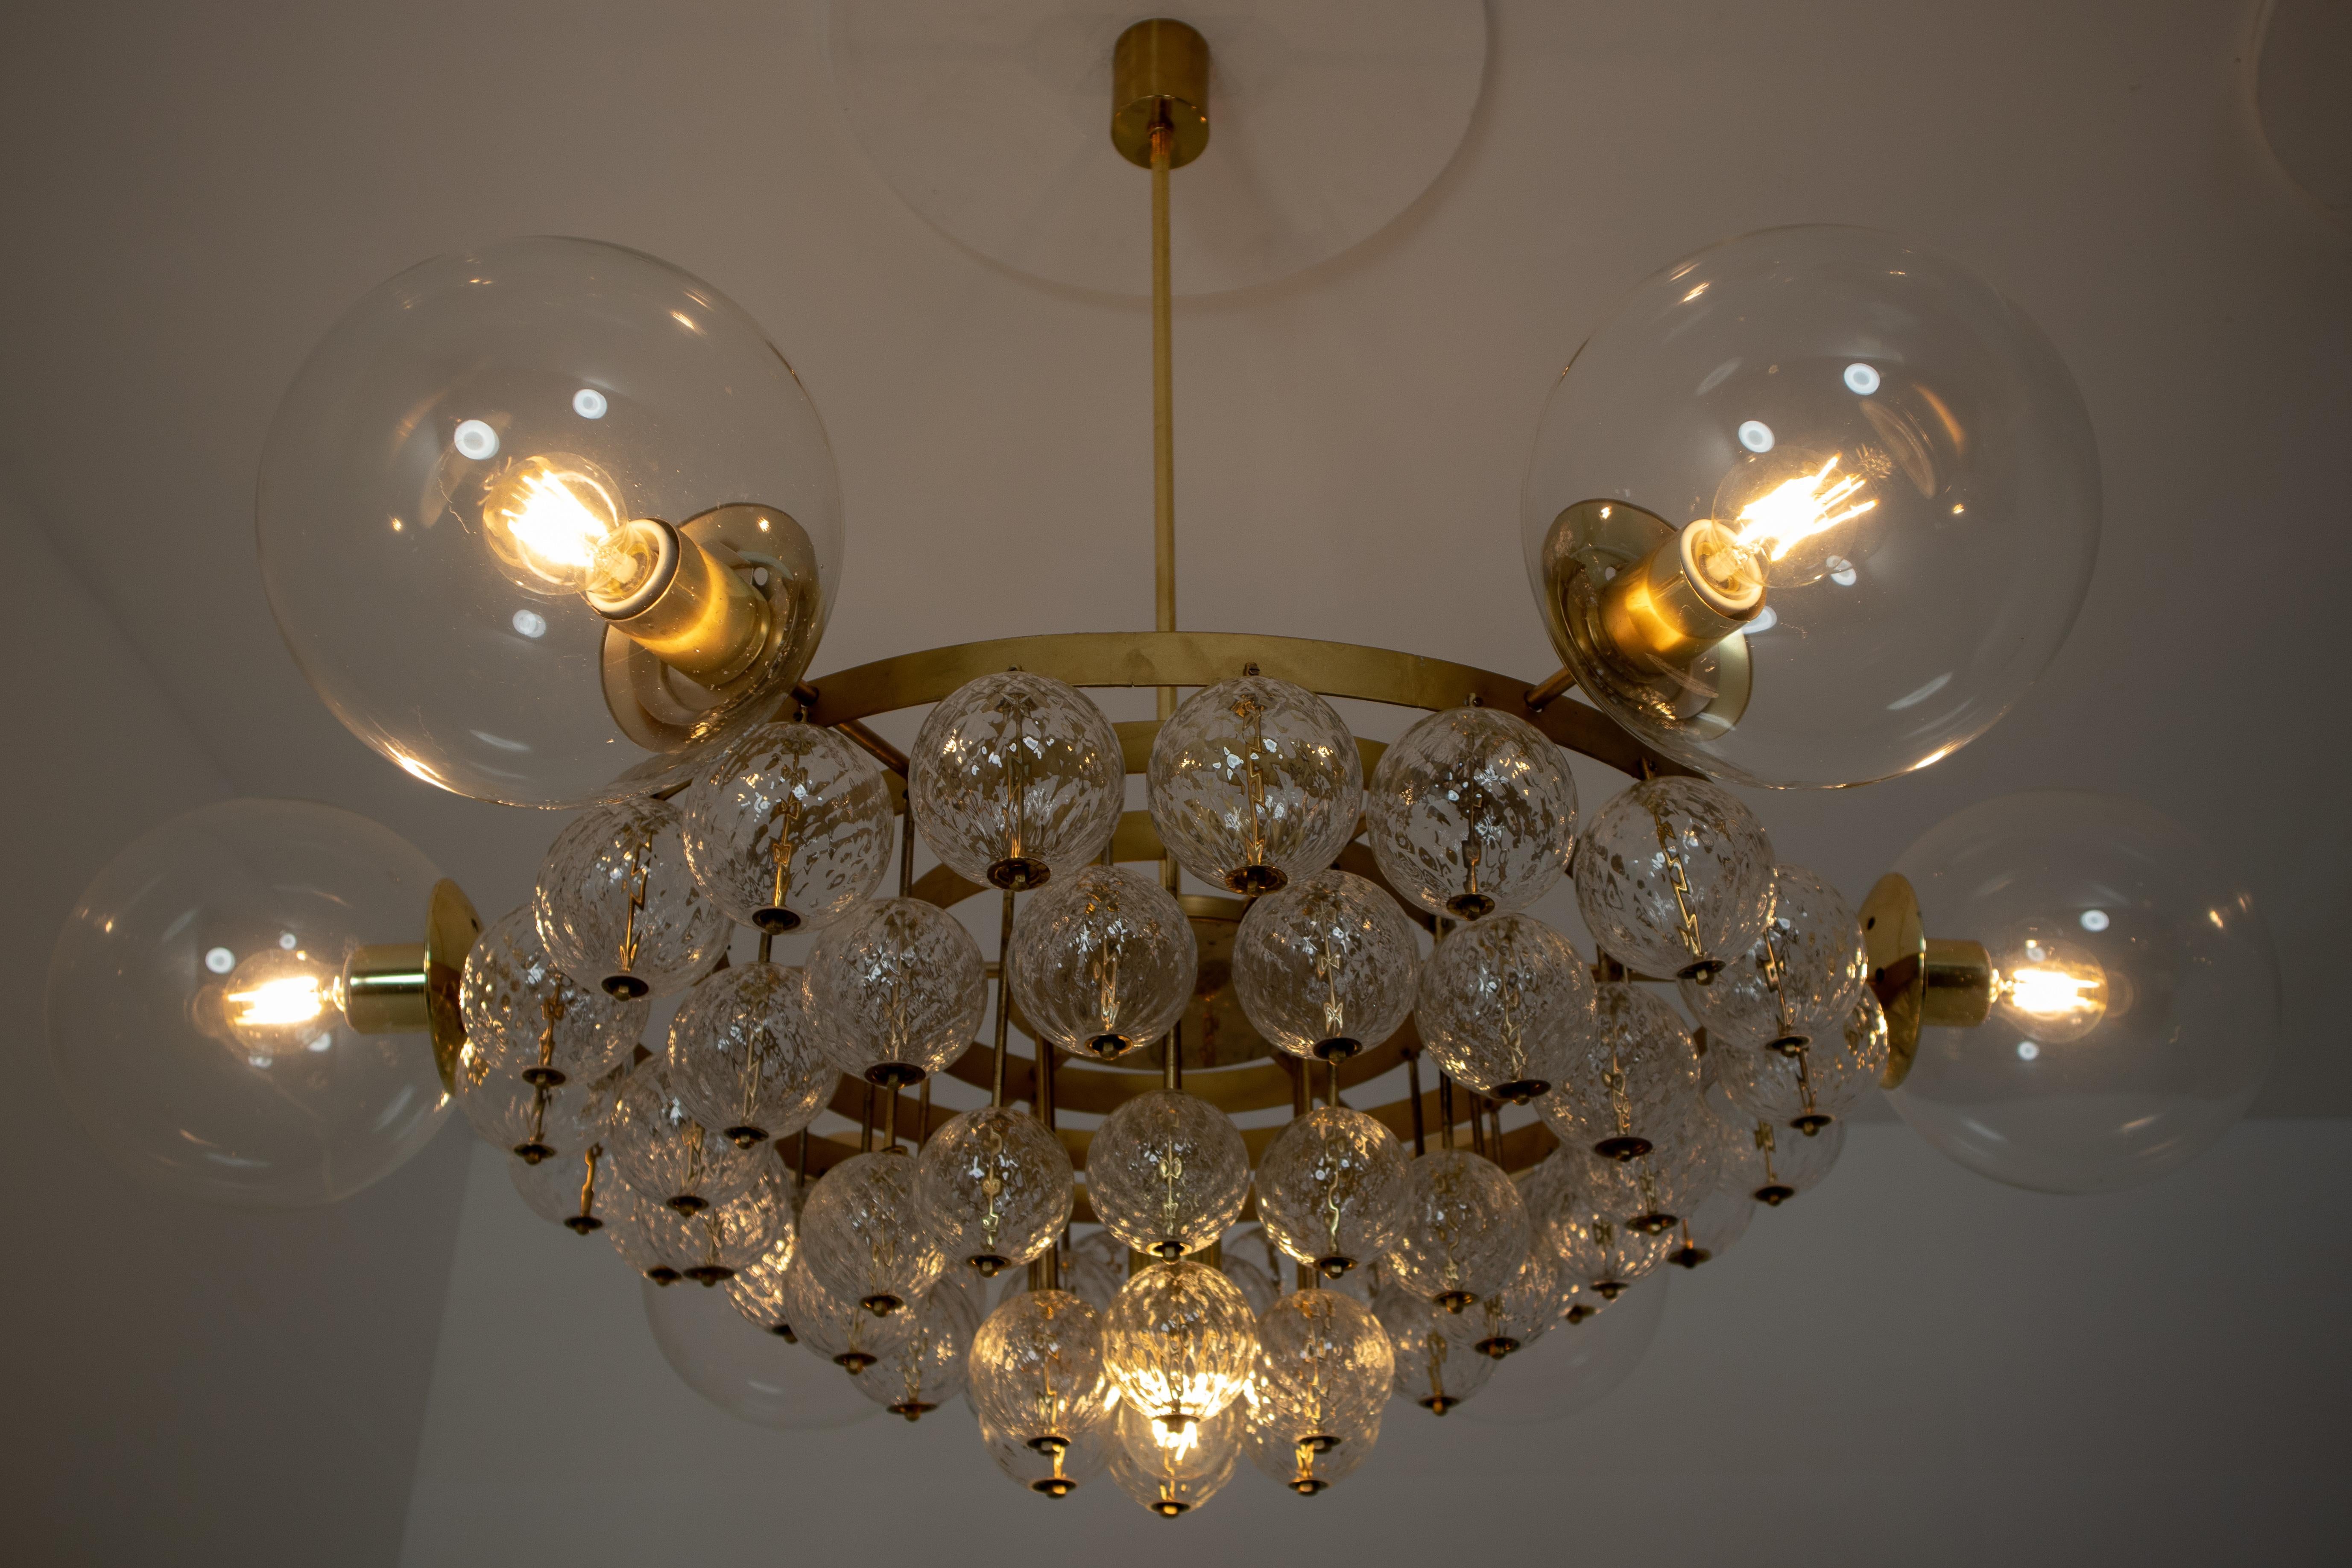 Large Hotel Chandeliers with Brass Fixture and Structured Glass Globes For Sale 3